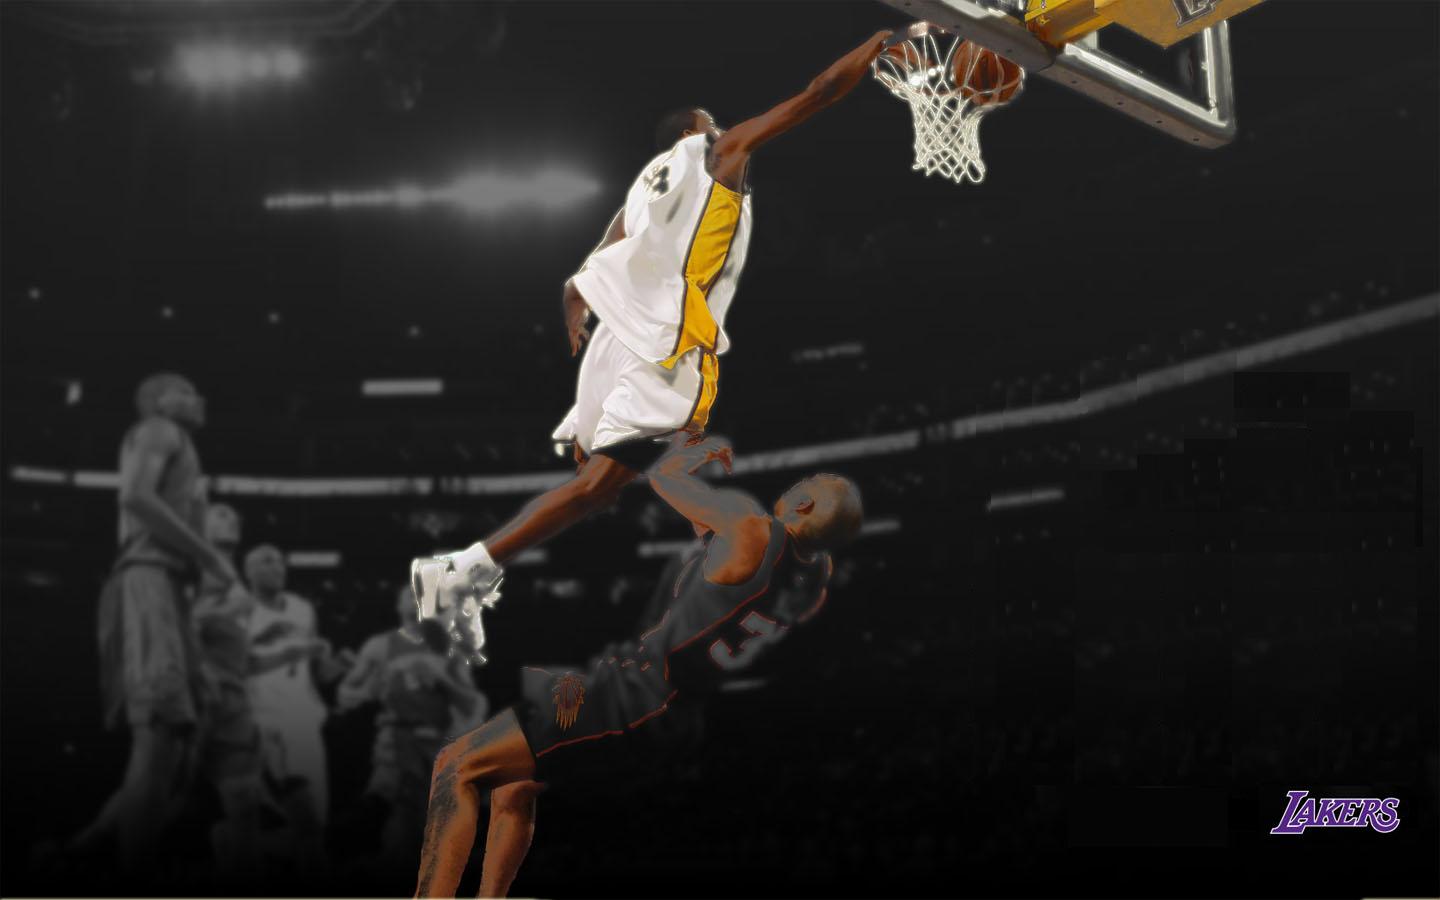 Wallpaper For Windows Xp Lakers